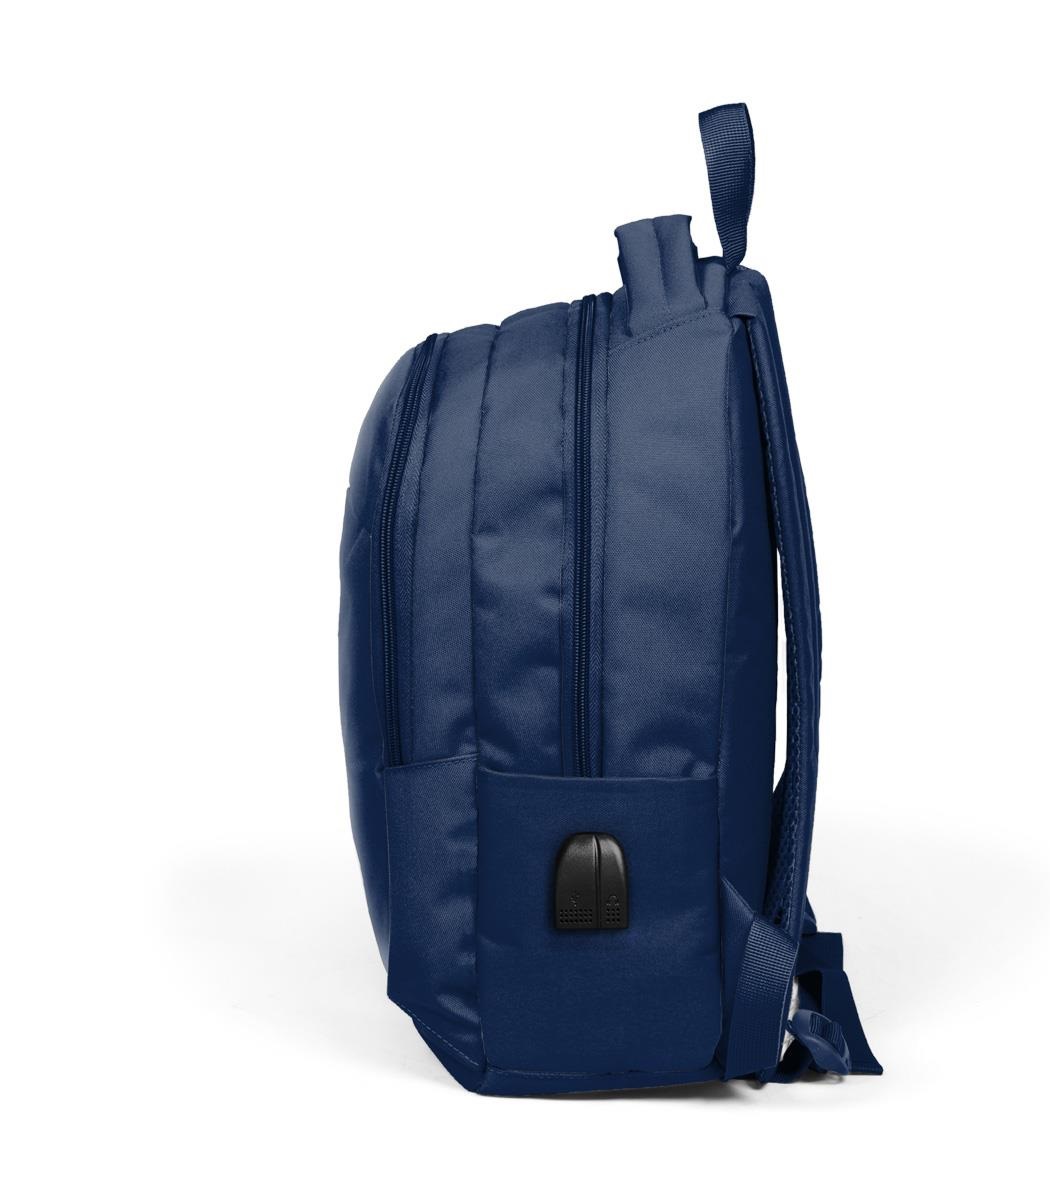 Coral High Kids Three Compartment USB School Backpack - Navy Blue